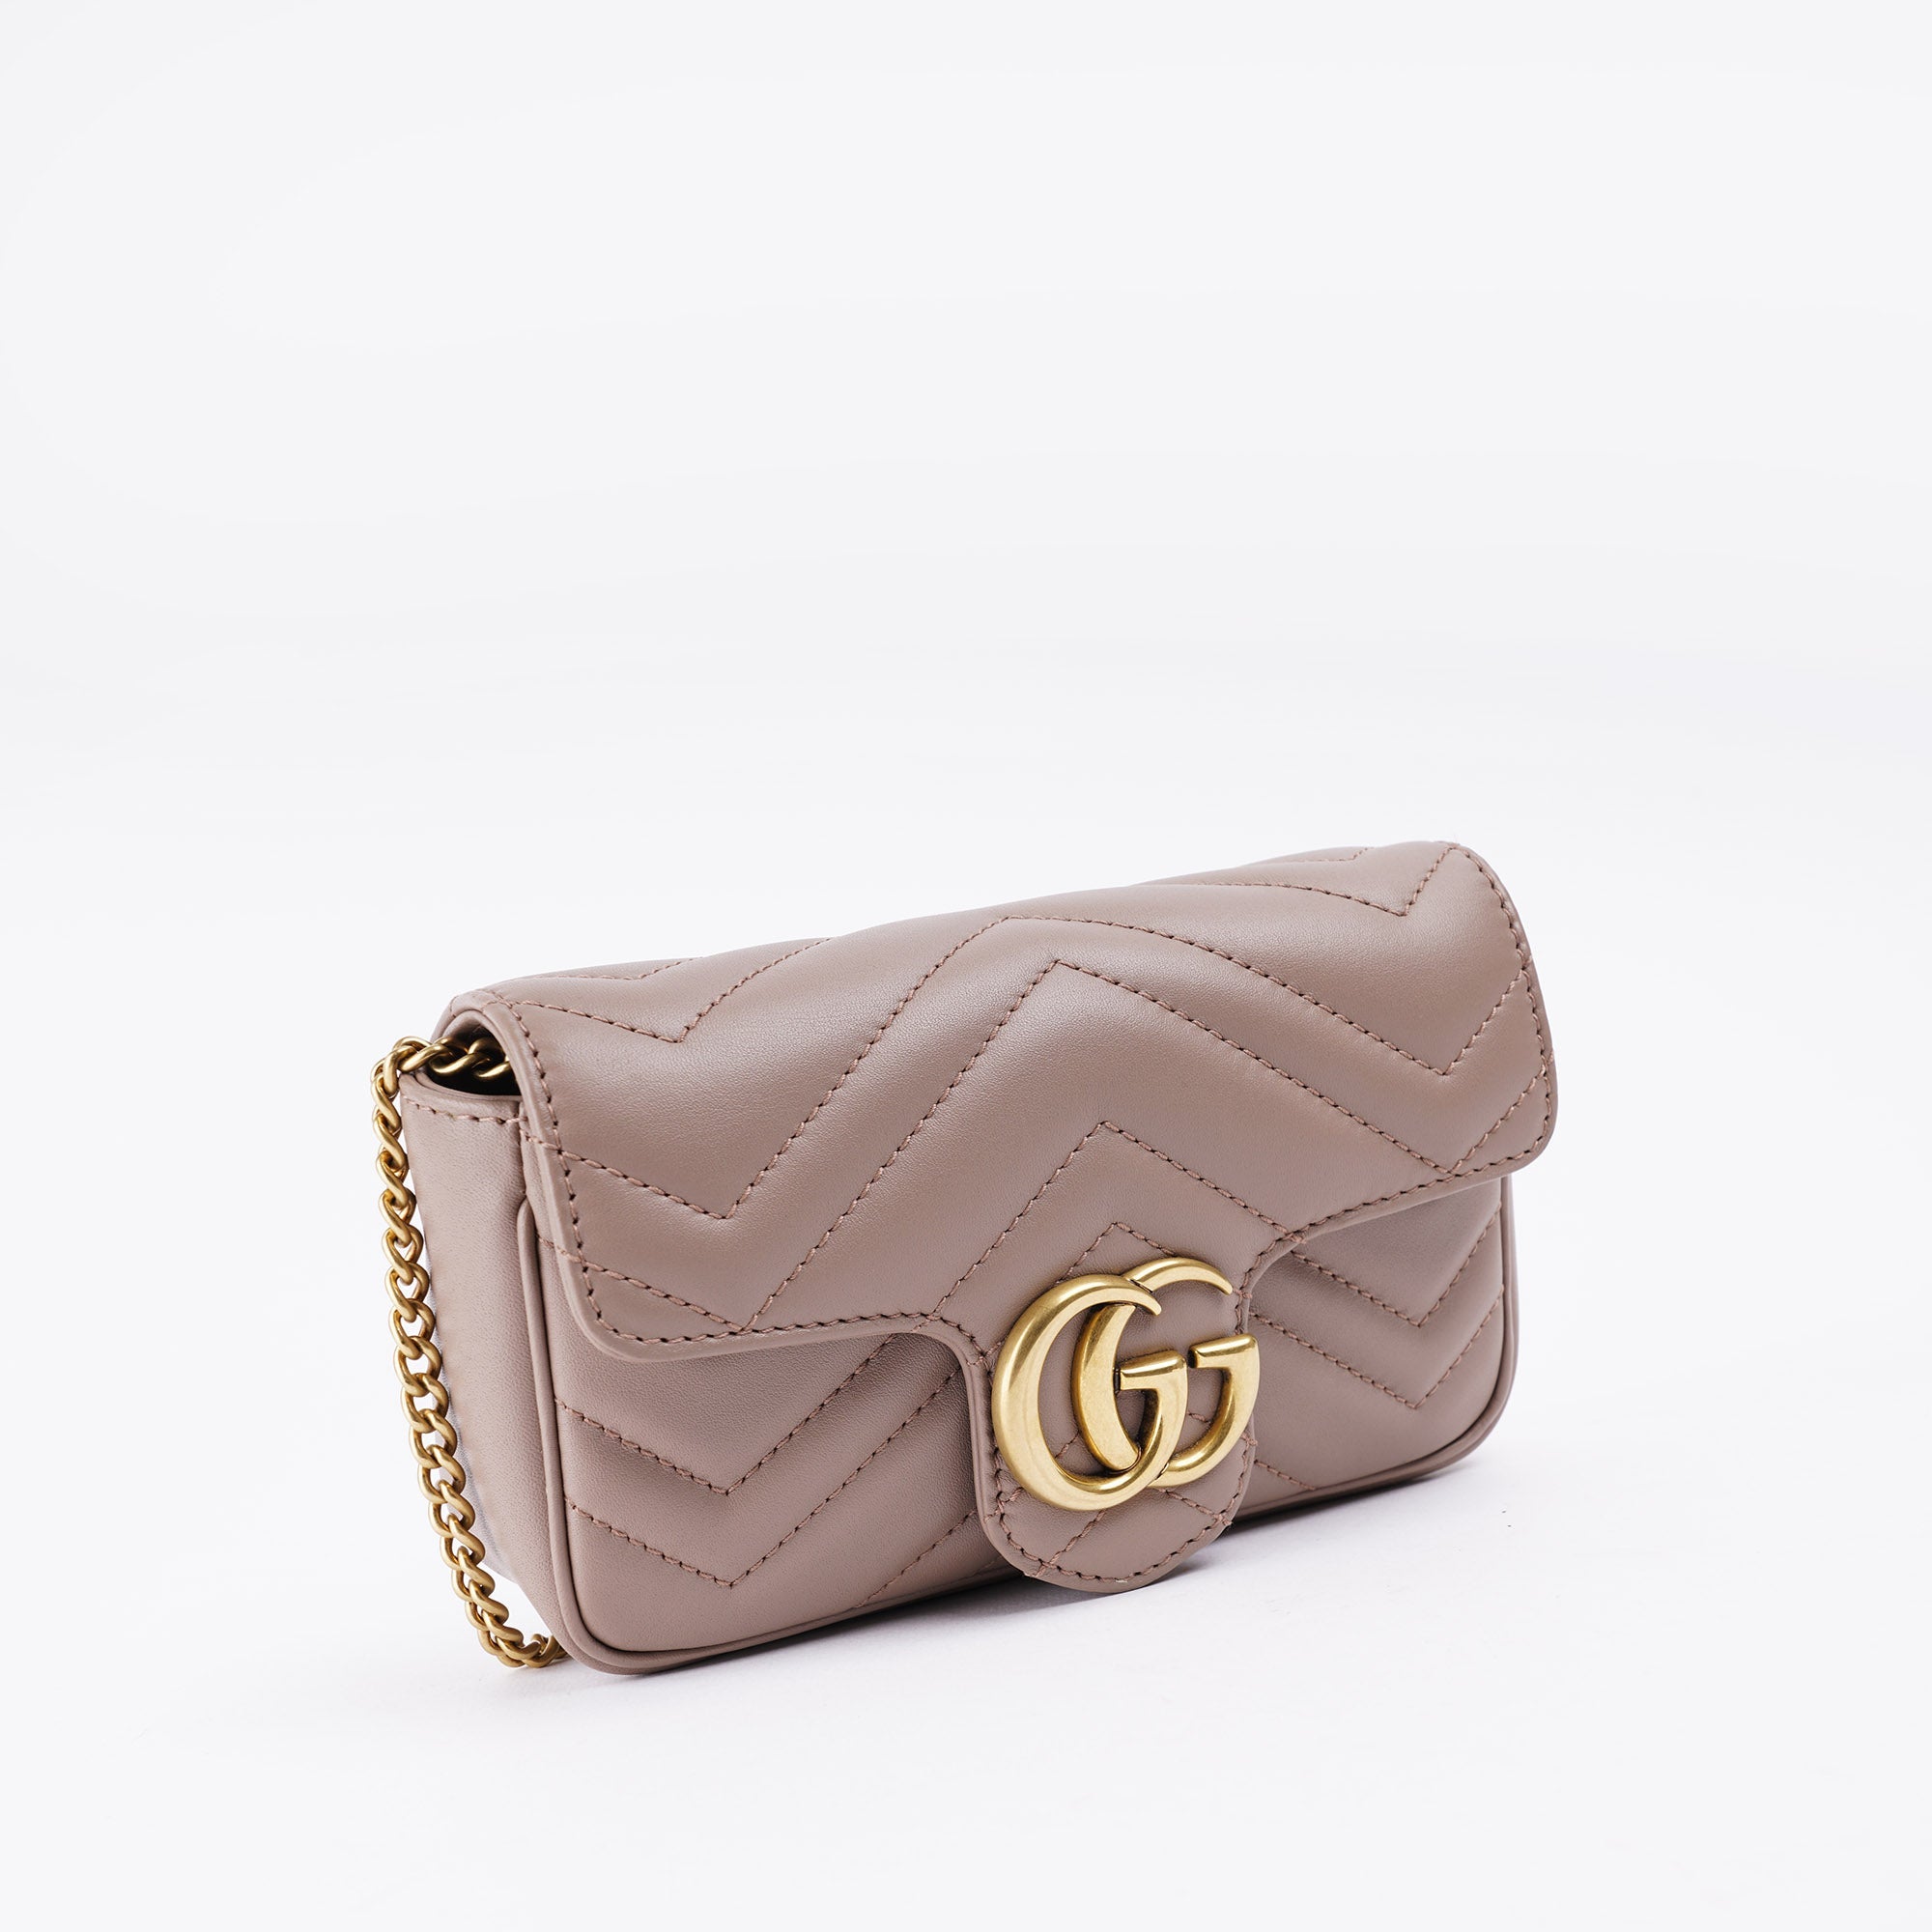 GG Marmont Super Mini Bag - GUCCI - Affordable Luxury image